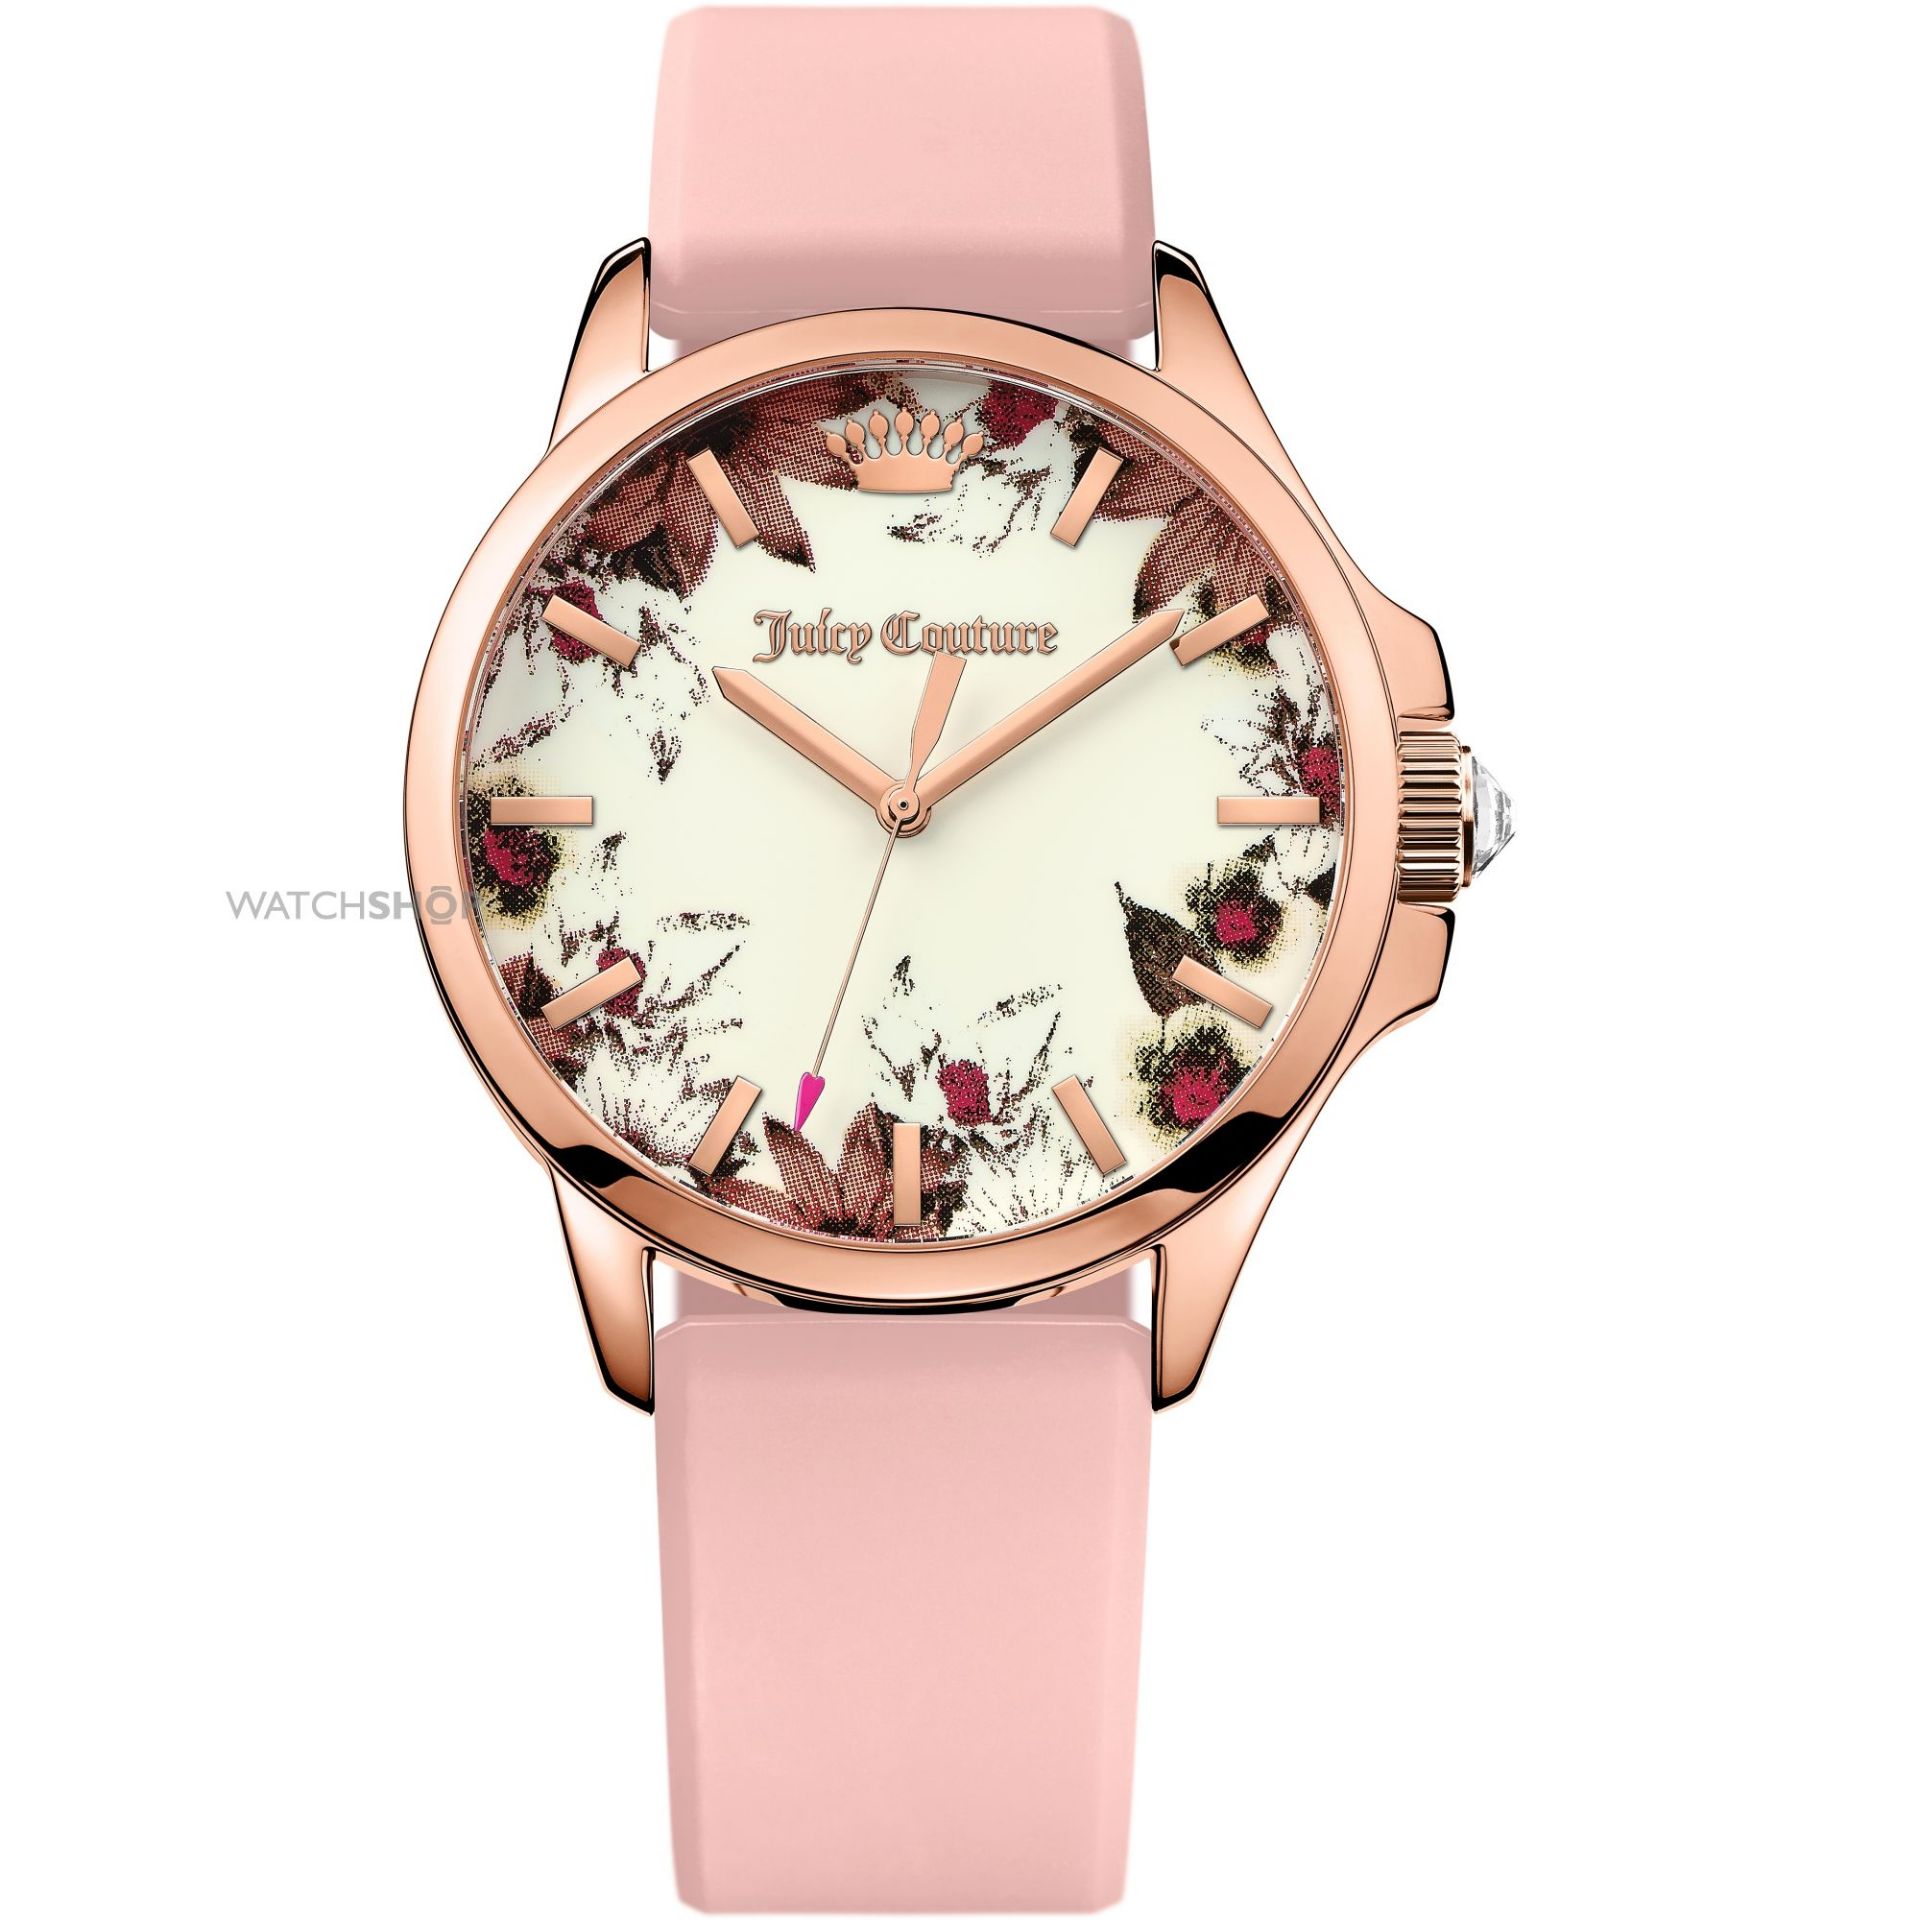 BRAND NEW JUICY COUTURE LADIES WRIST WATCH WITH 2 YEARS INTERNATIONAL WARRANTY (1901485)